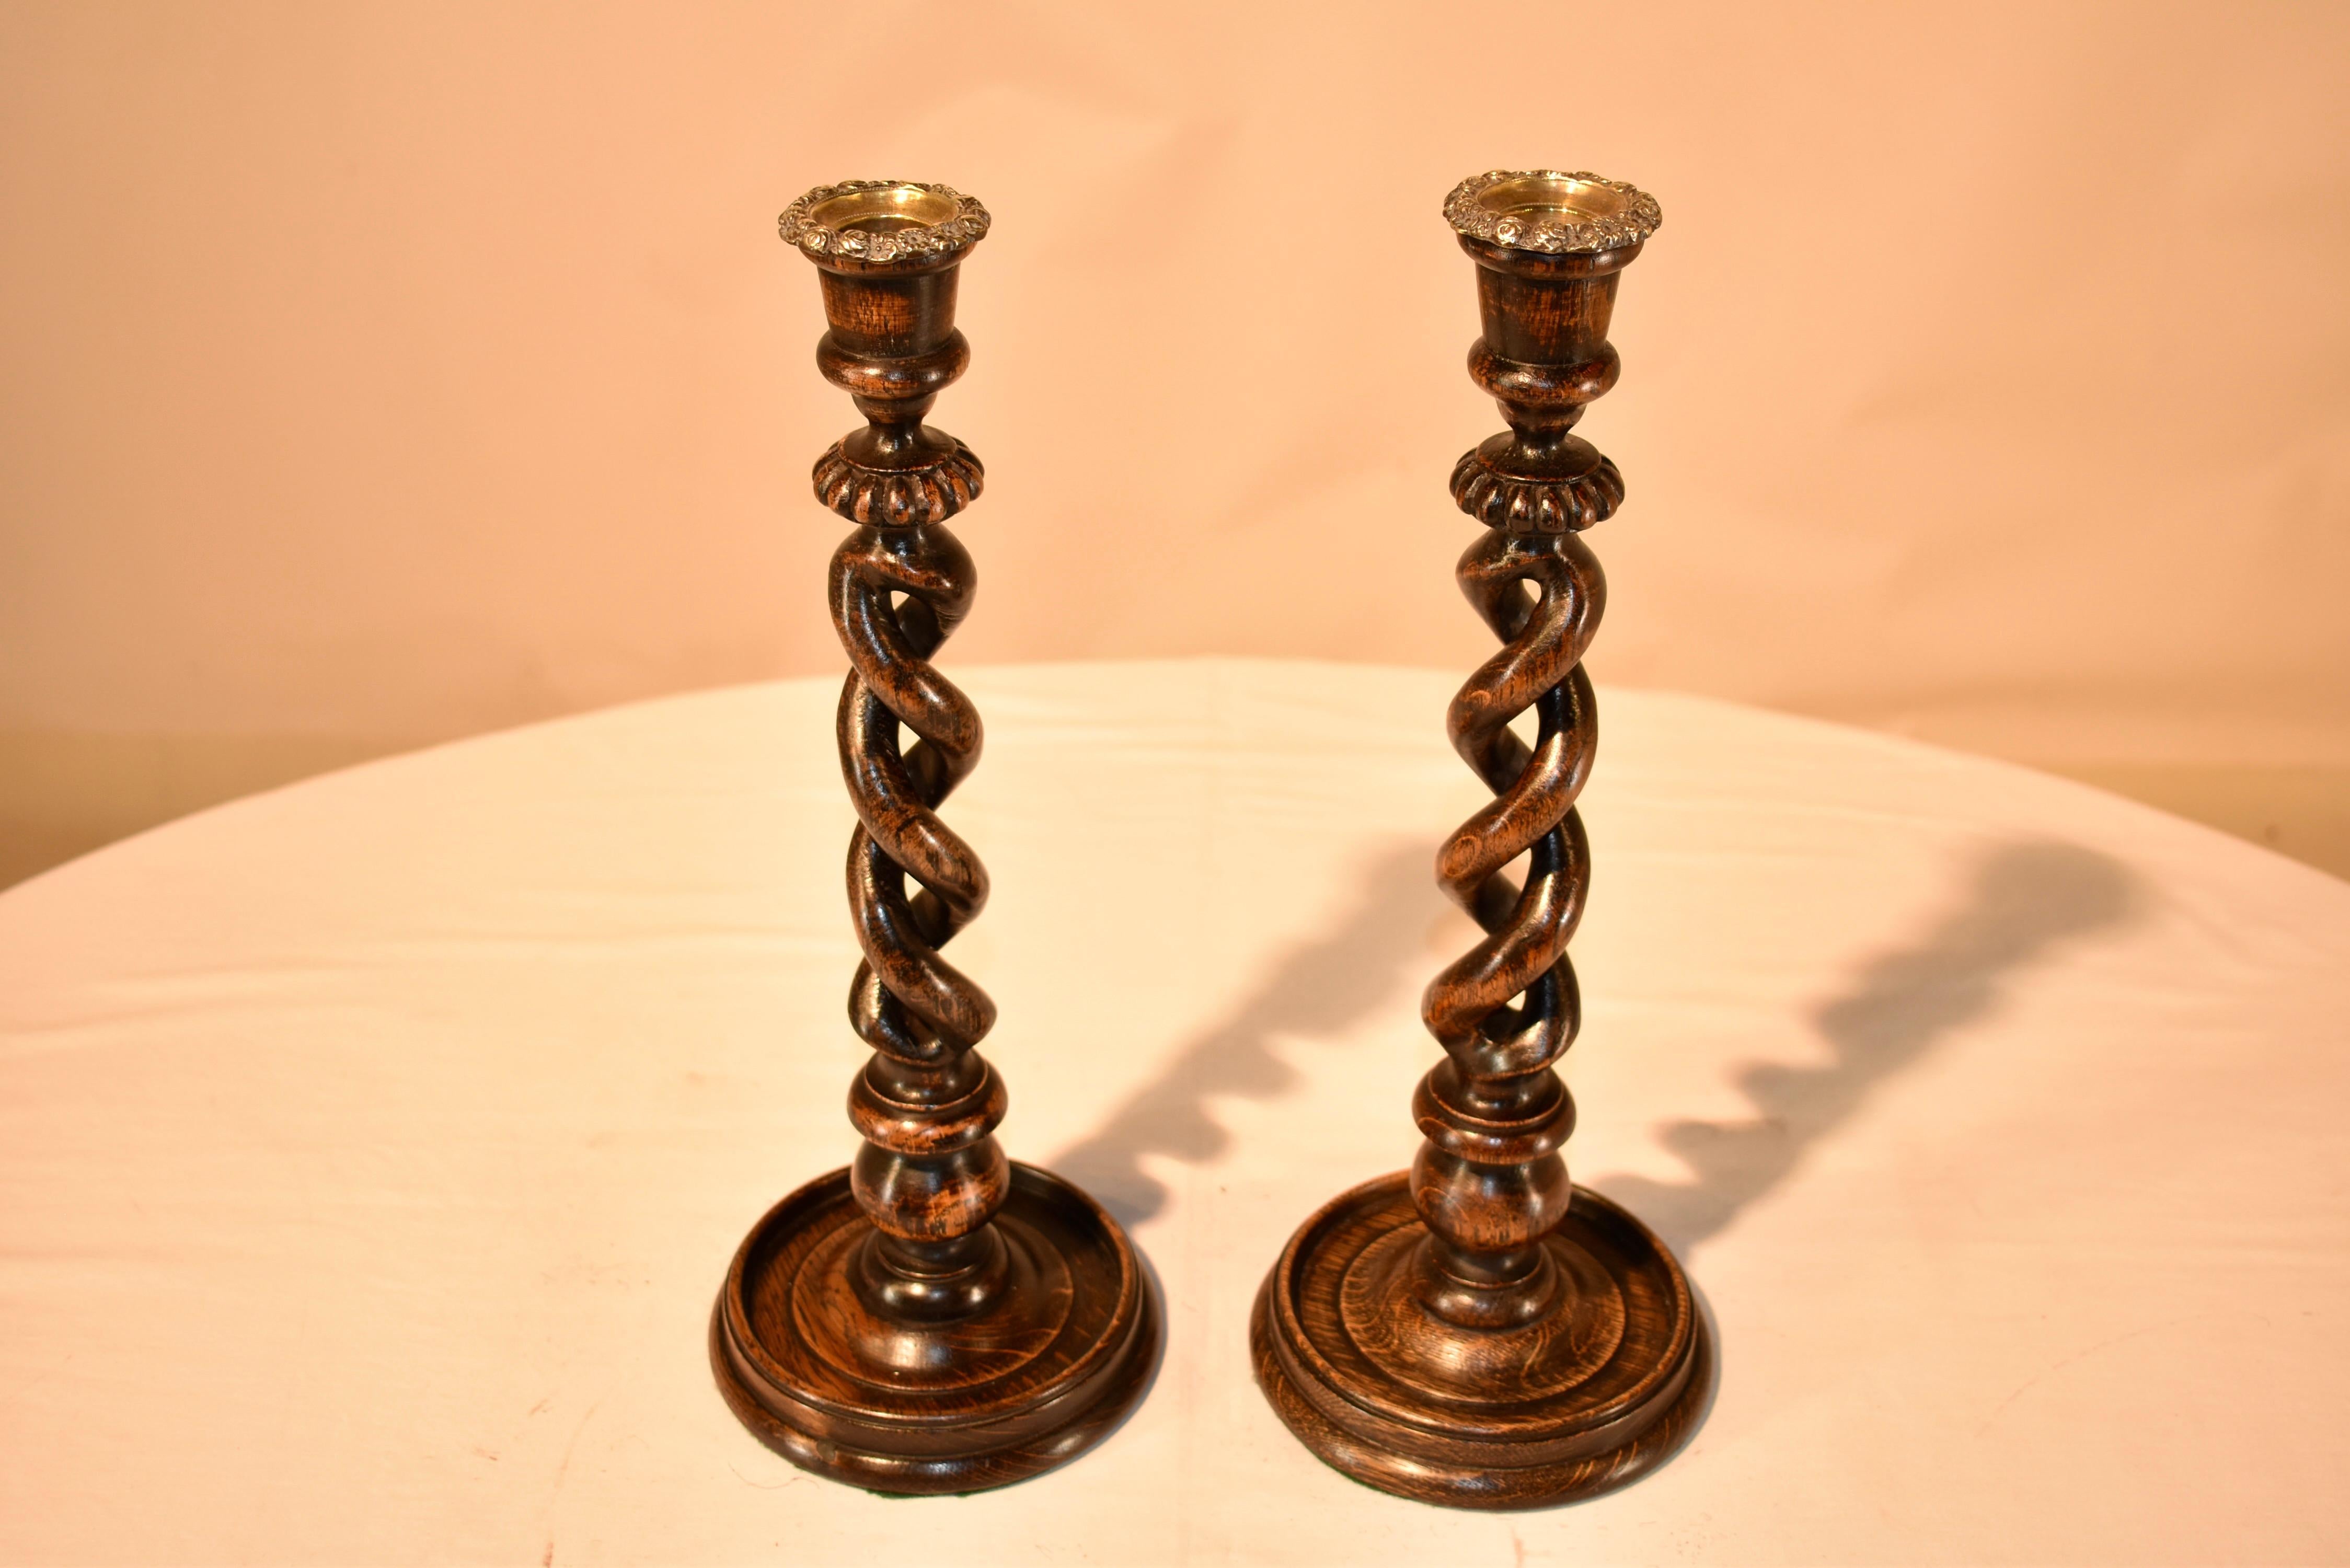 Turned Pair of 19th Century Open Twist Candlesticks For Sale